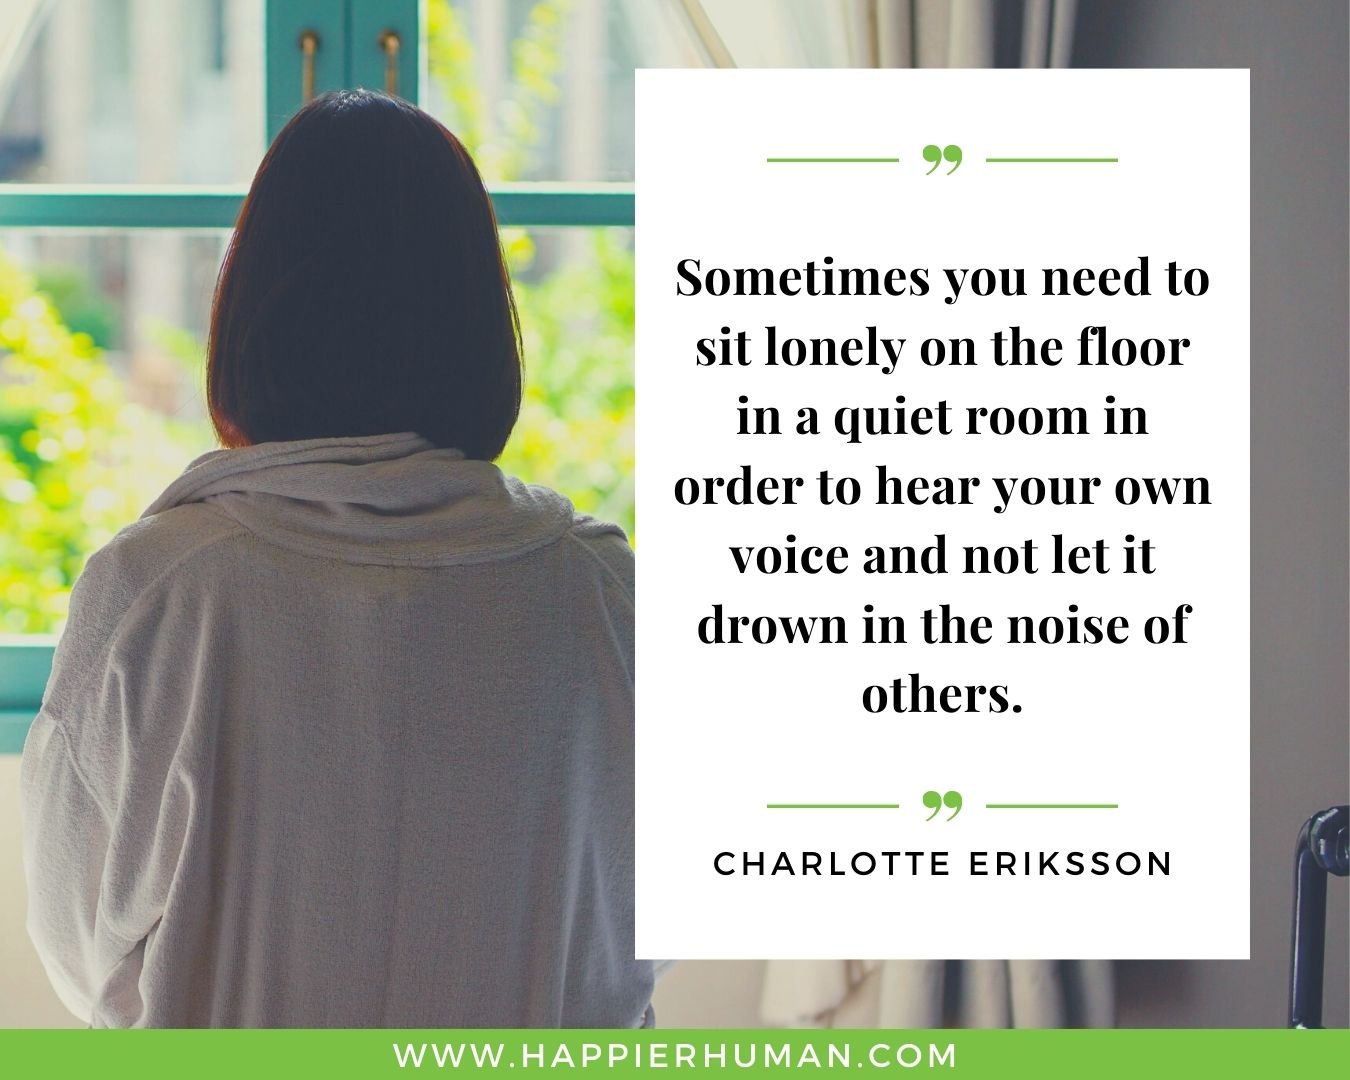 Loneliness Quotes - “Sometimes you need to sit lonely on the floor in a quiet room in order to hear your own voice and not let it drown in the noise of others.” – Charlotte Eriksson